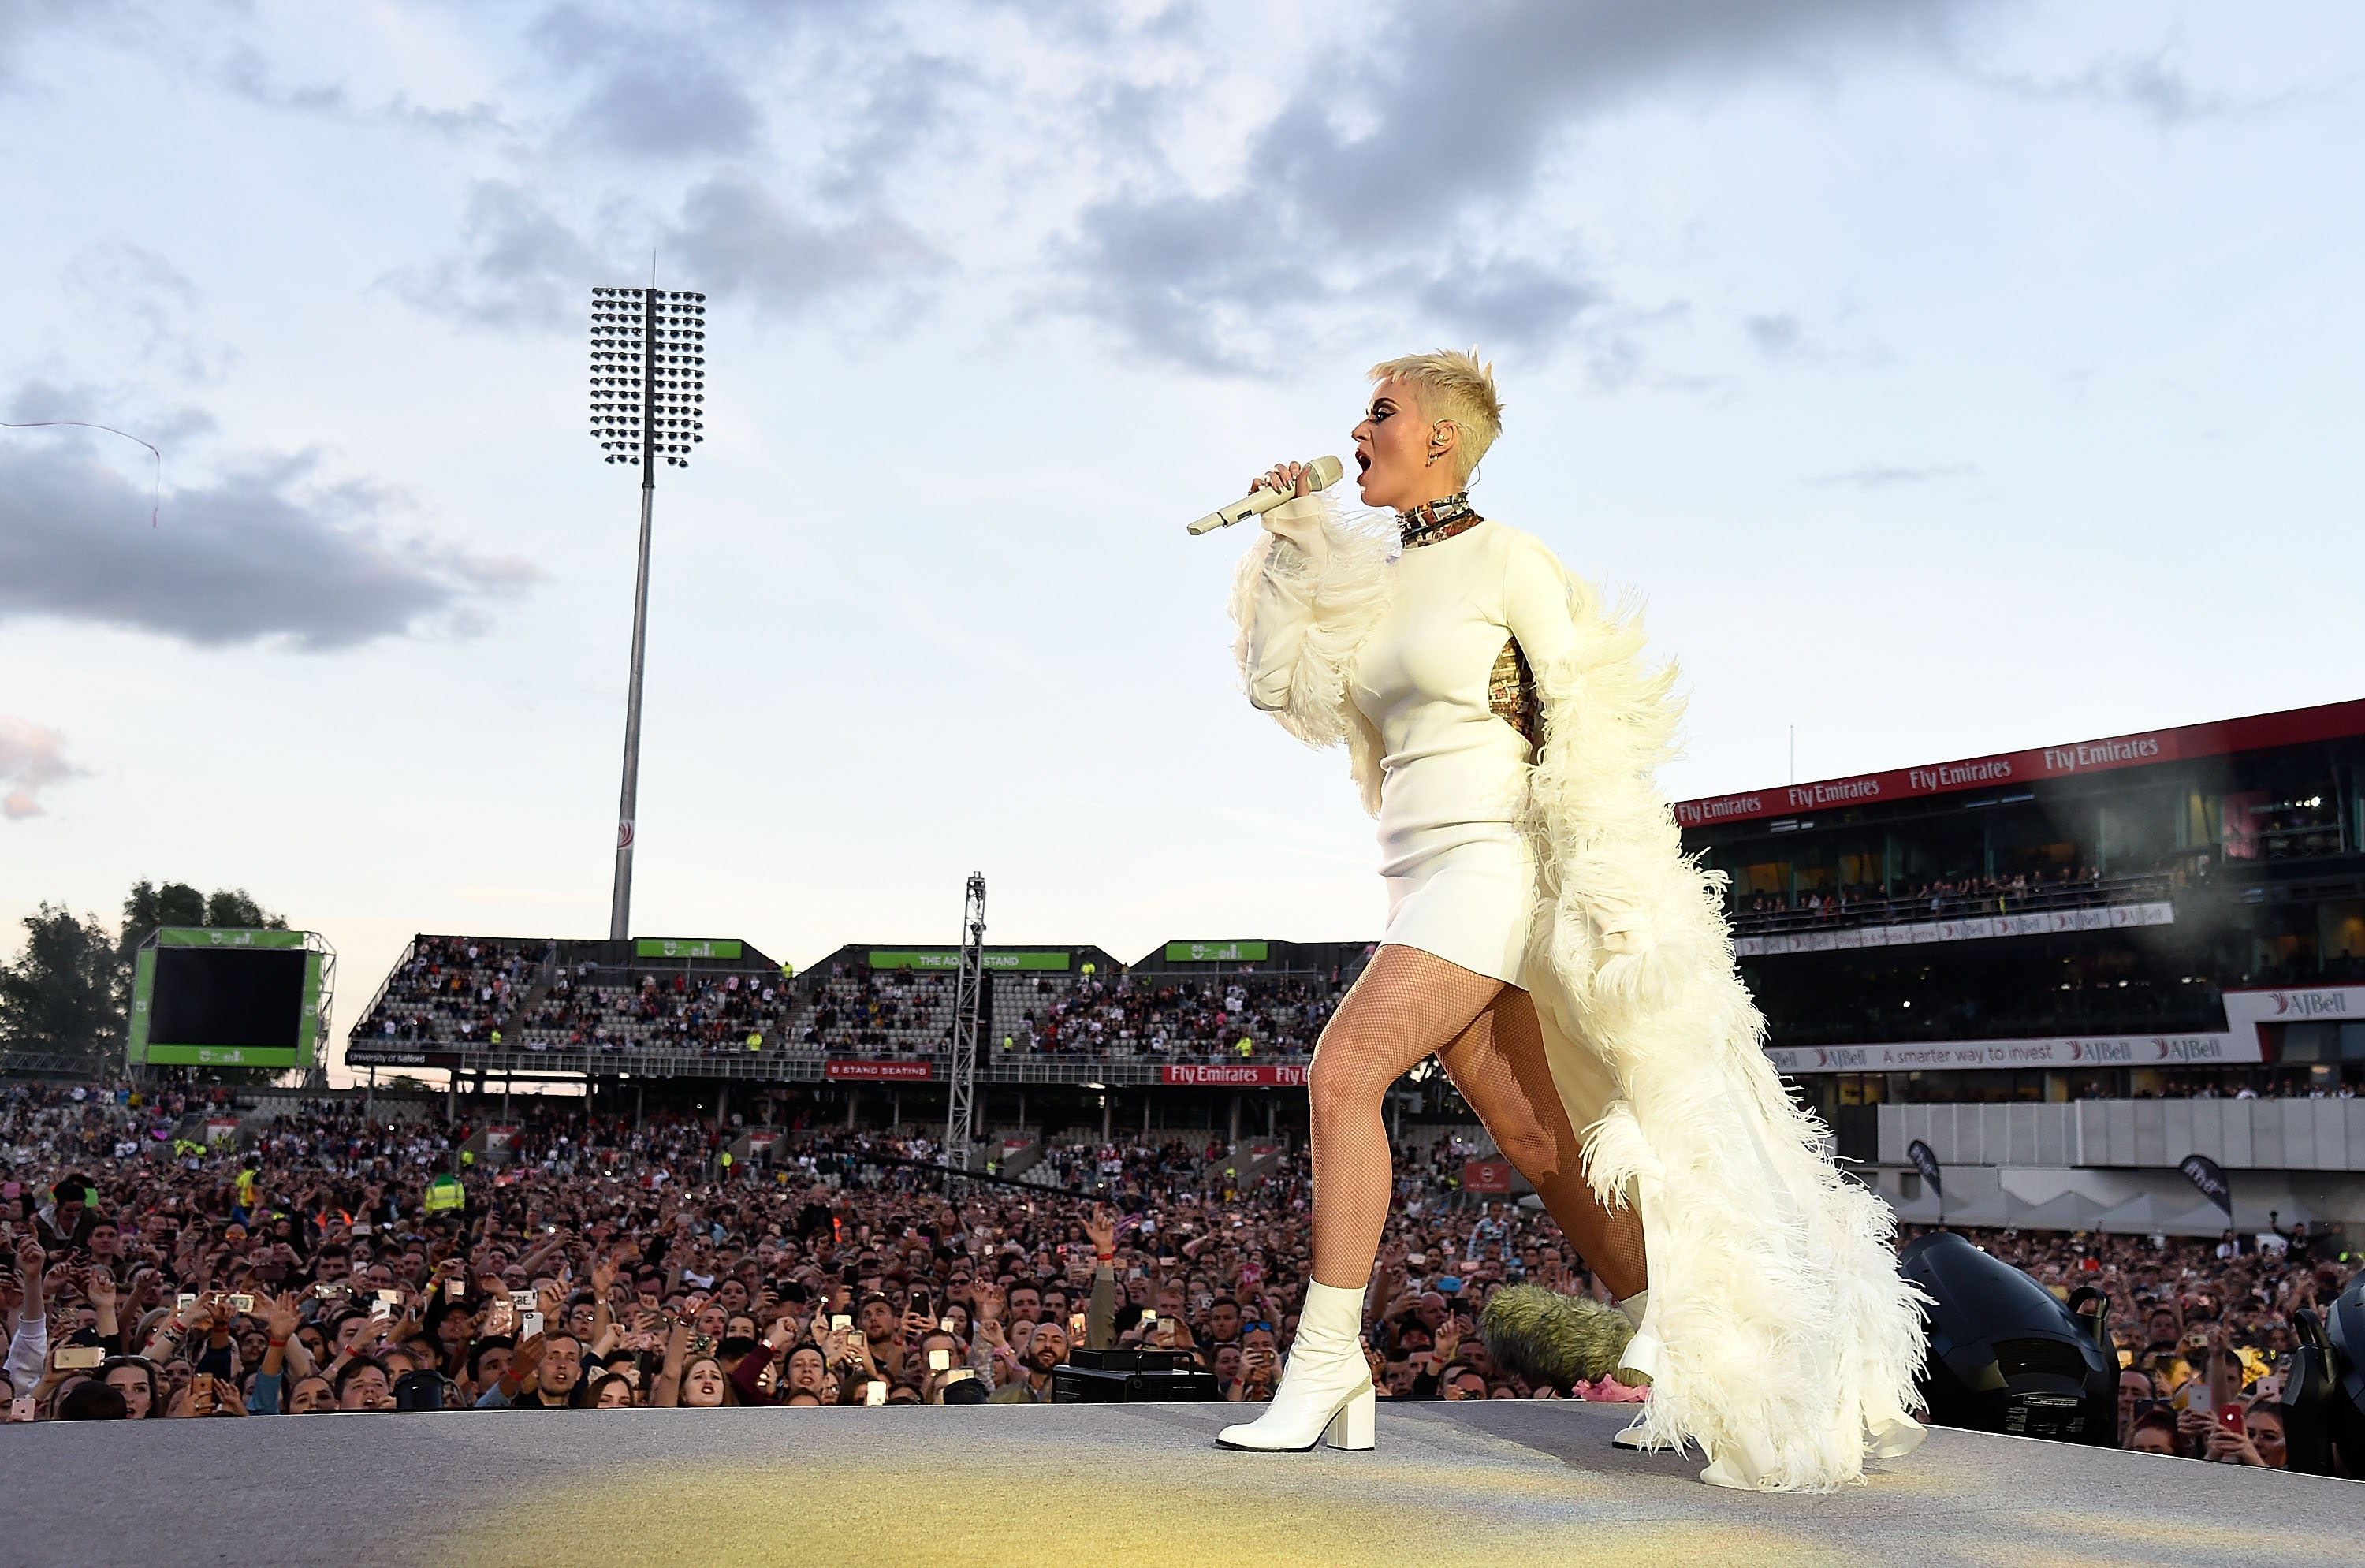 Katy Perry performs on stage during the One Love Manchester Benefit Concert at Old Trafford Cricket Ground on June 4, 2017 in Manchester, England. (Kevin Mazur/One Love Manchester&mdash;Getty Images)